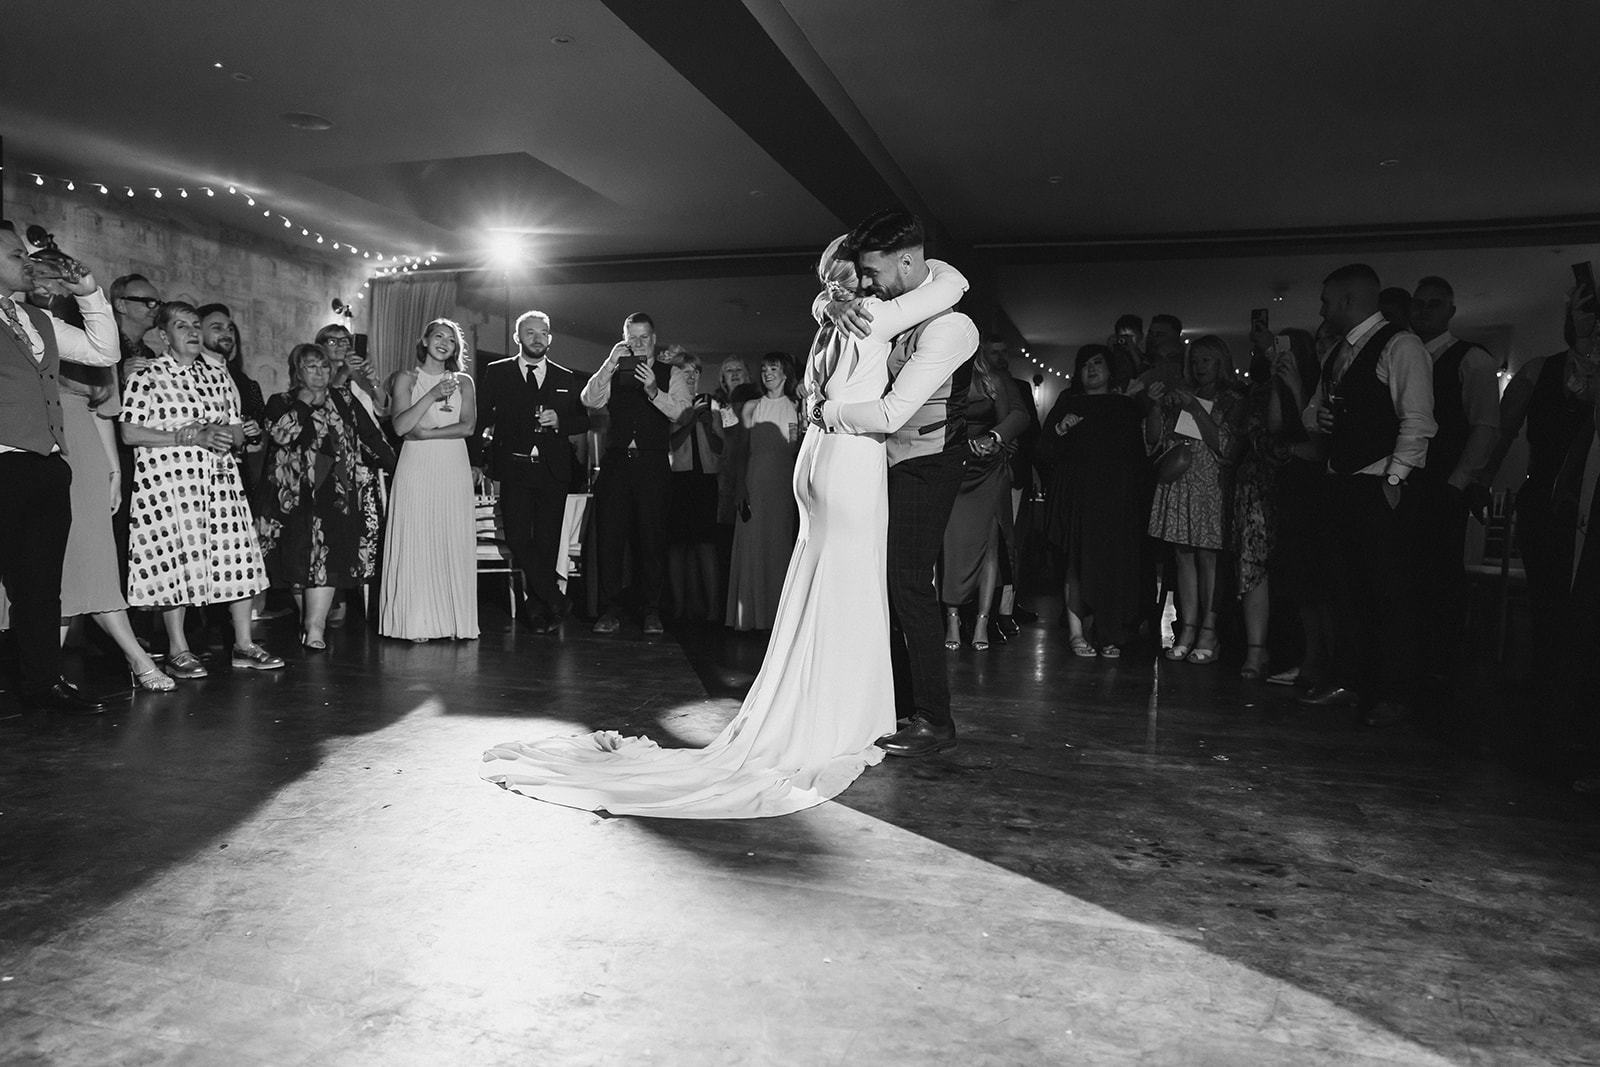 The Chequers Inn Wedding Photography - the bride and groom embrace during the first dance